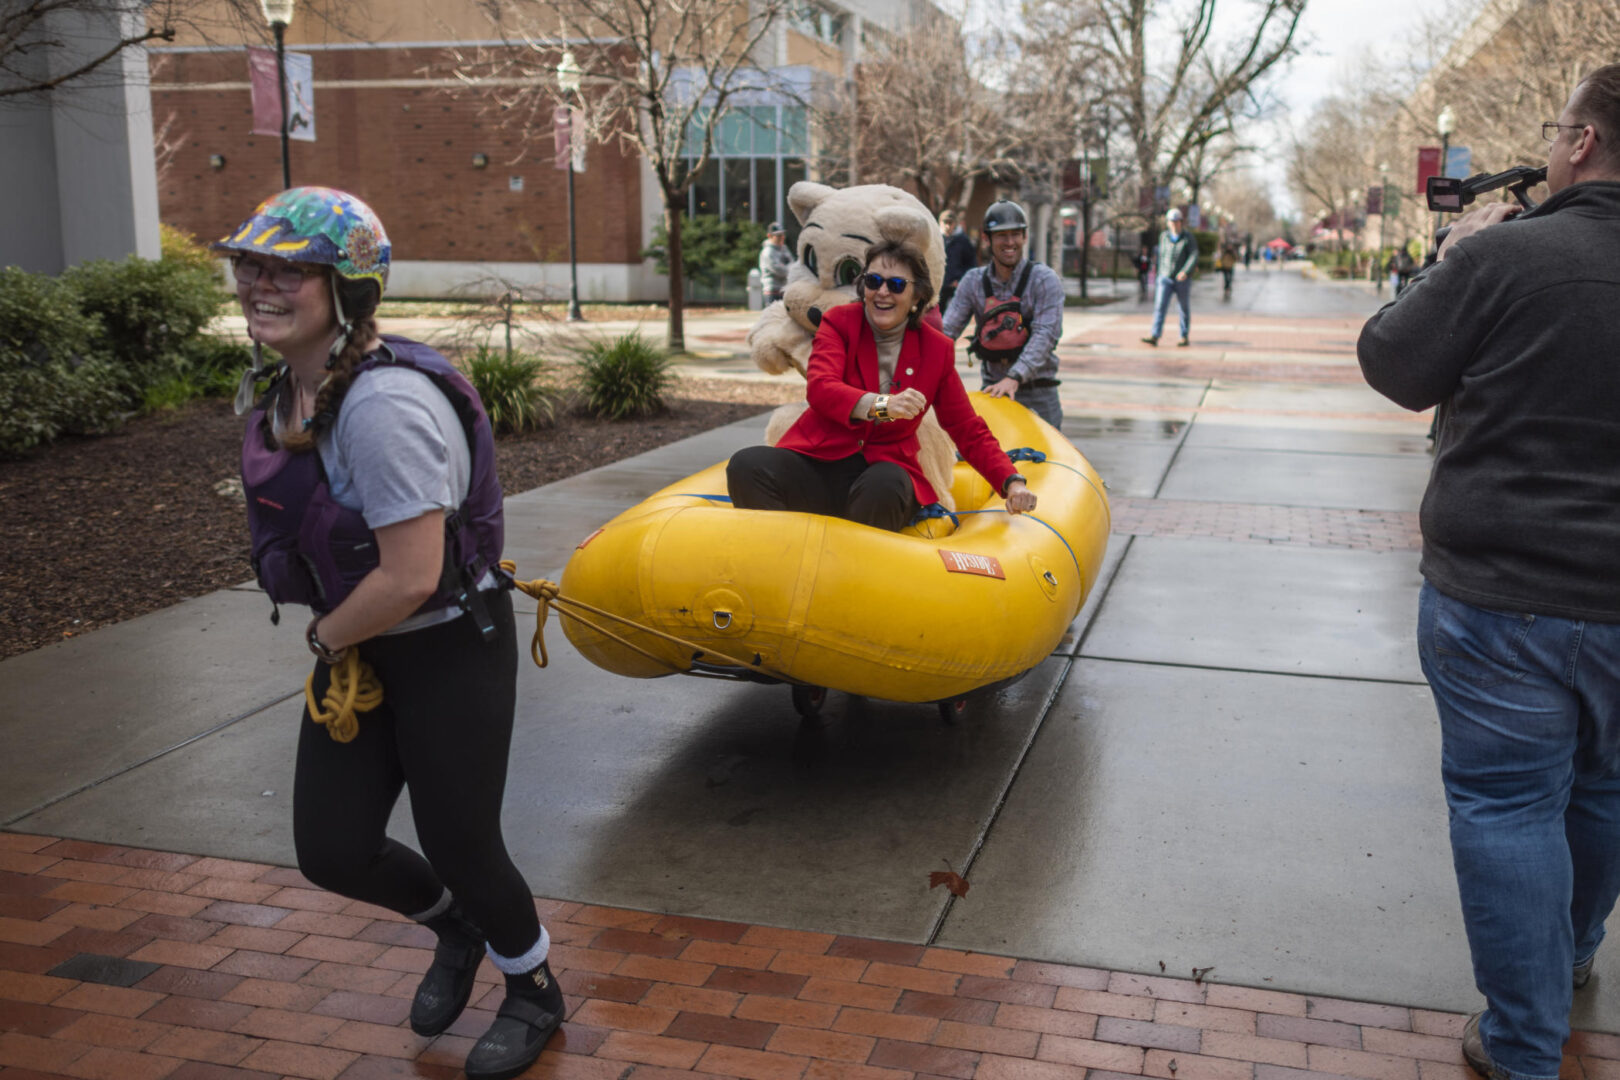 President Hutchinson laughs as she pretends to row while being pulled in a life raft on wheels by Adventure Outings staff on campus.